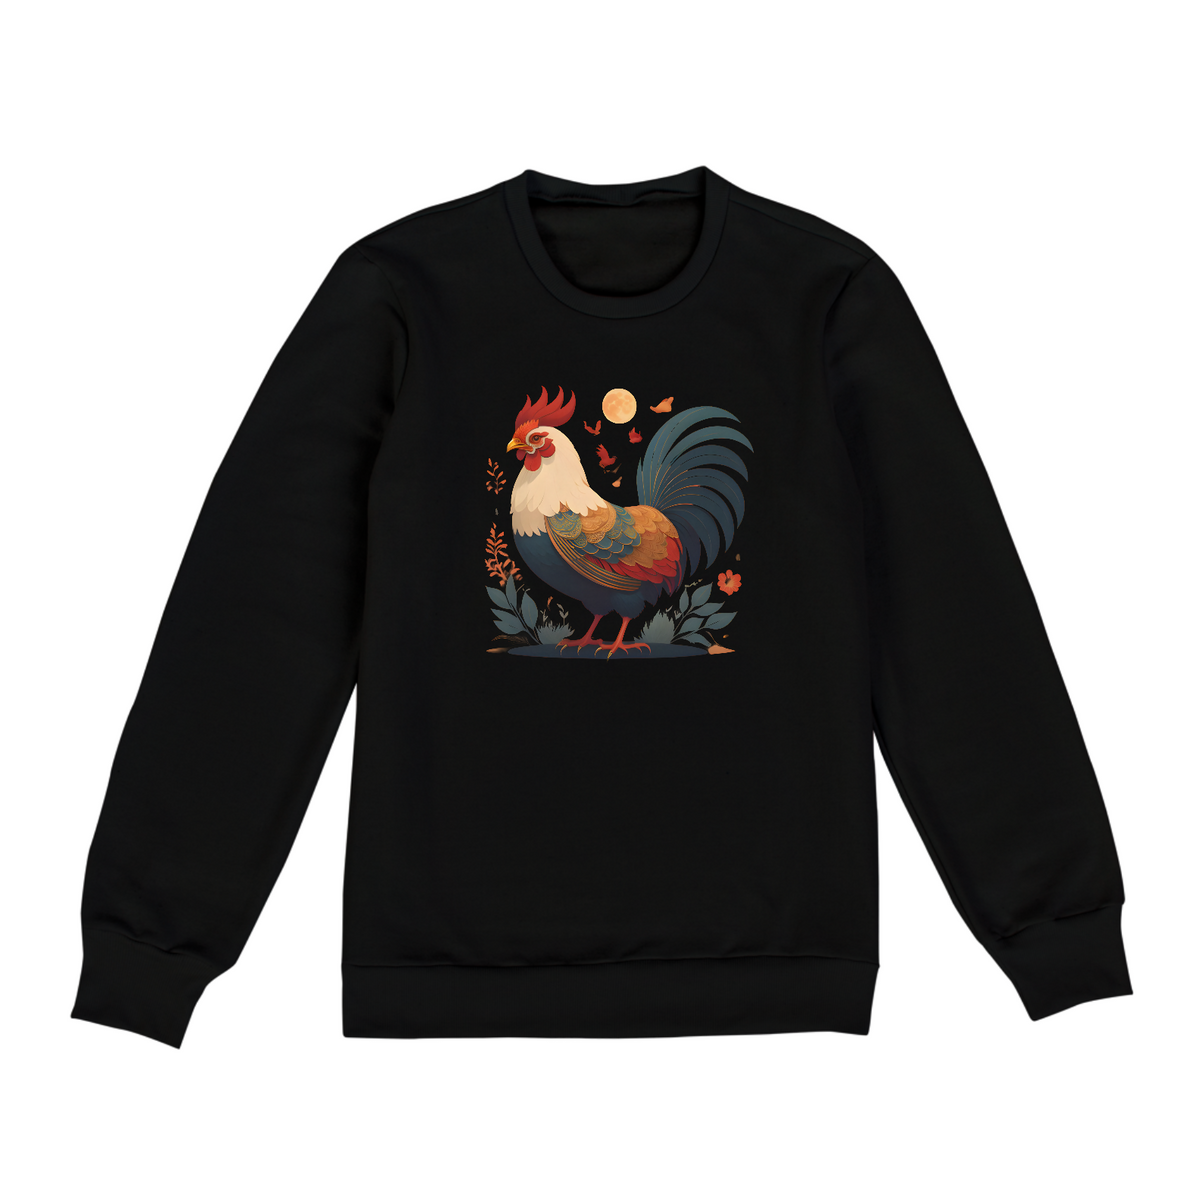 Nome do produto: Chinese New Year - Moletom Rooster